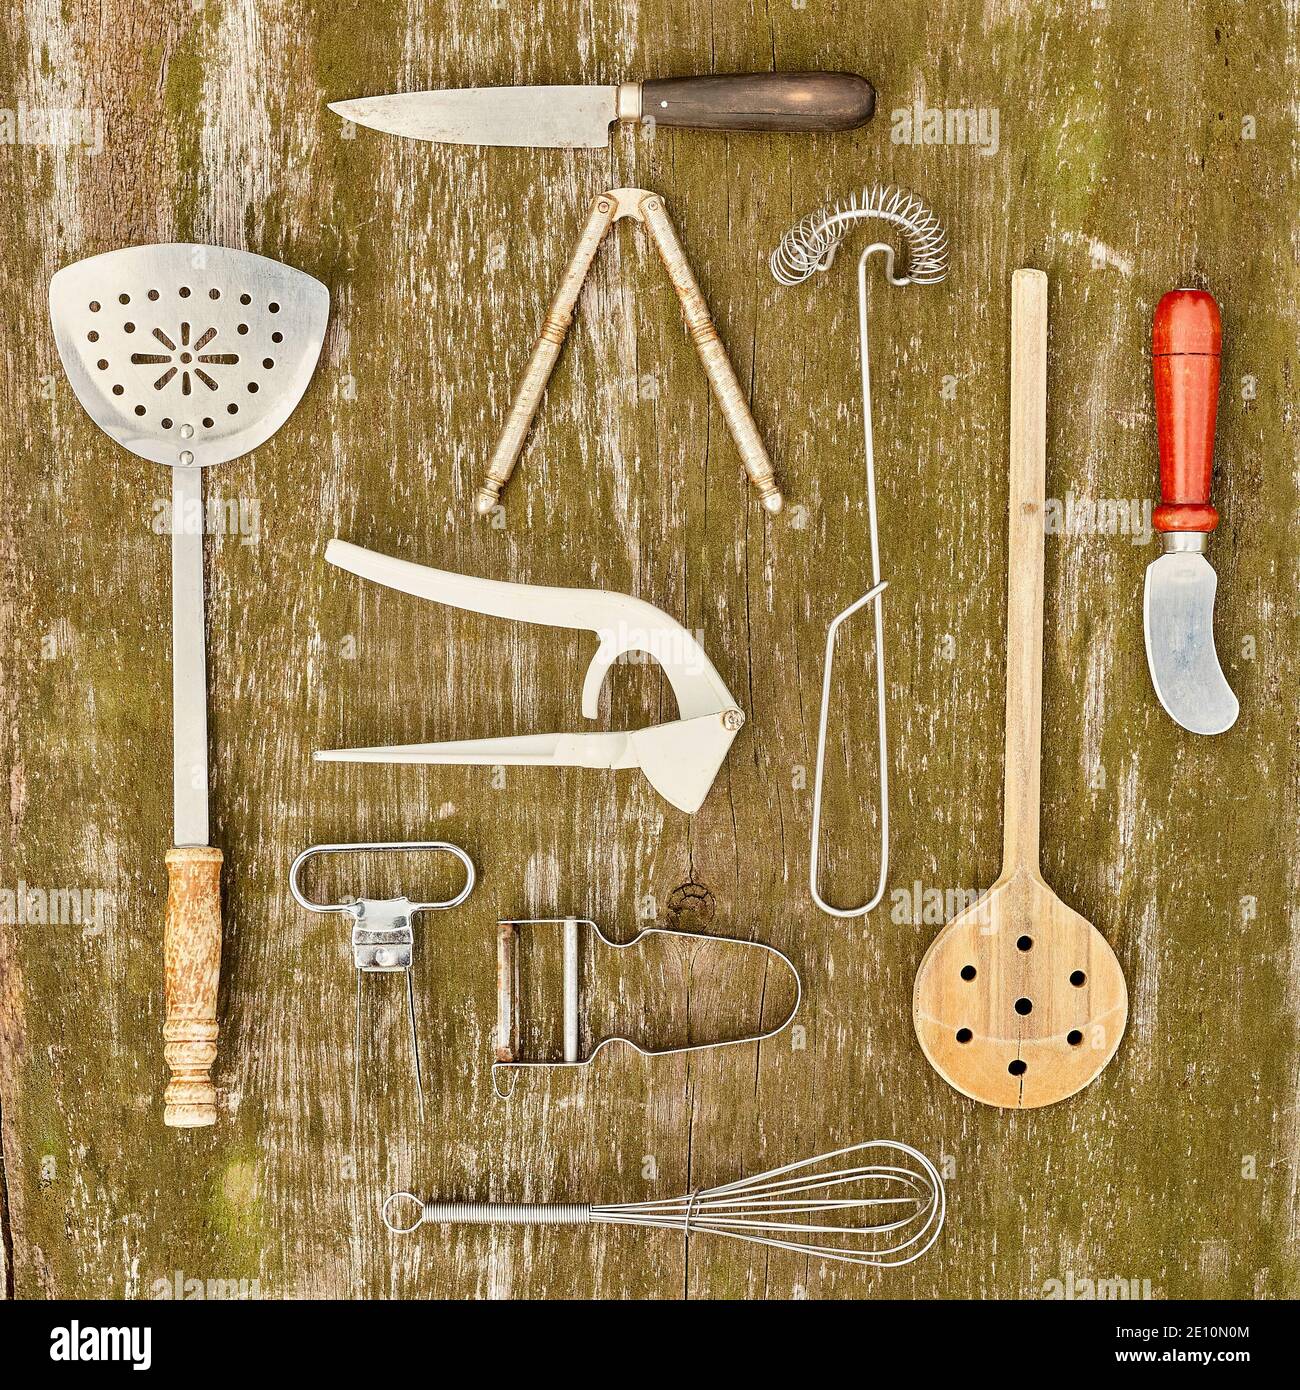 Old Kitchen Implements on Wooden Surface 1 Stock Photo